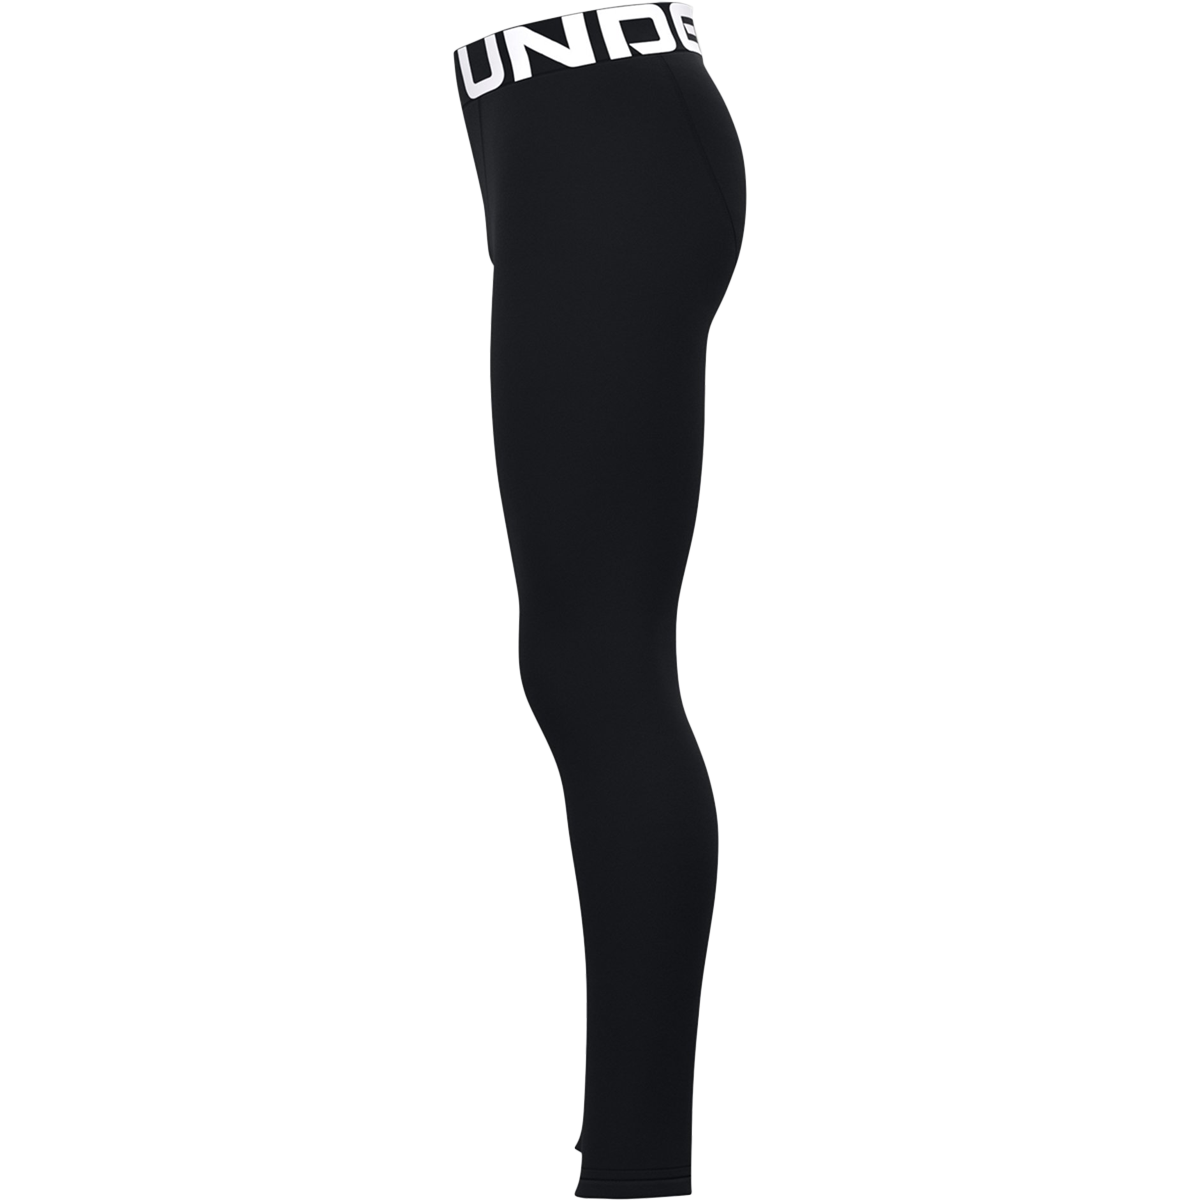 Youth ColdGear Armour Leggings alternate view